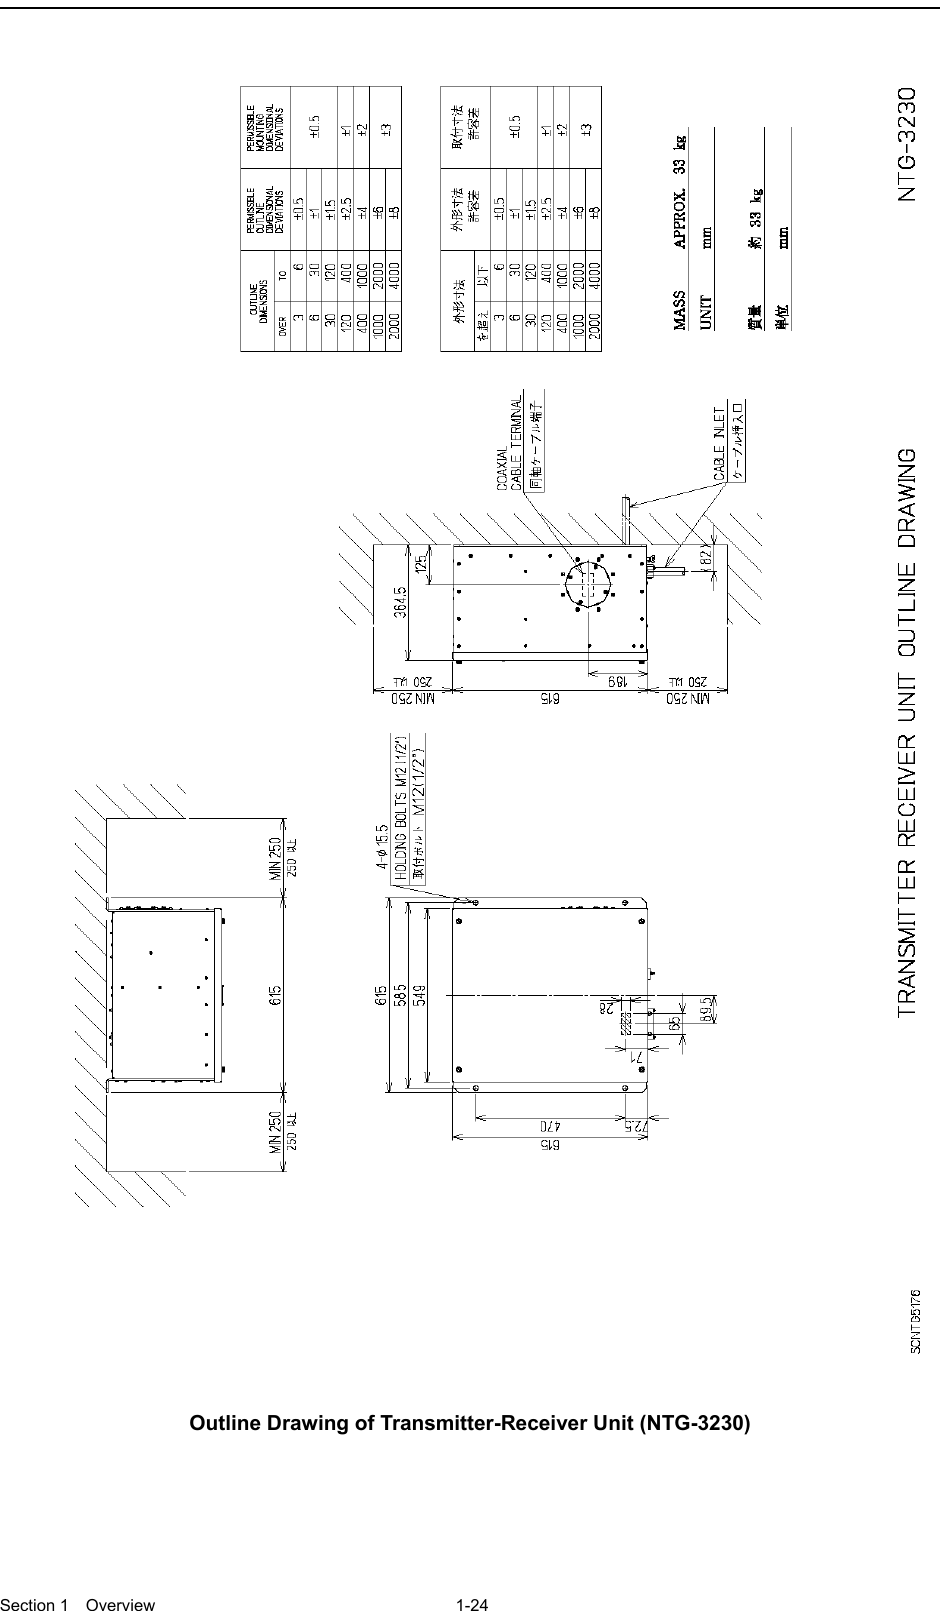  Section 1  Overview 1-24    Outline Drawing of Transmitter-Receiver Unit (NTG-3230)  